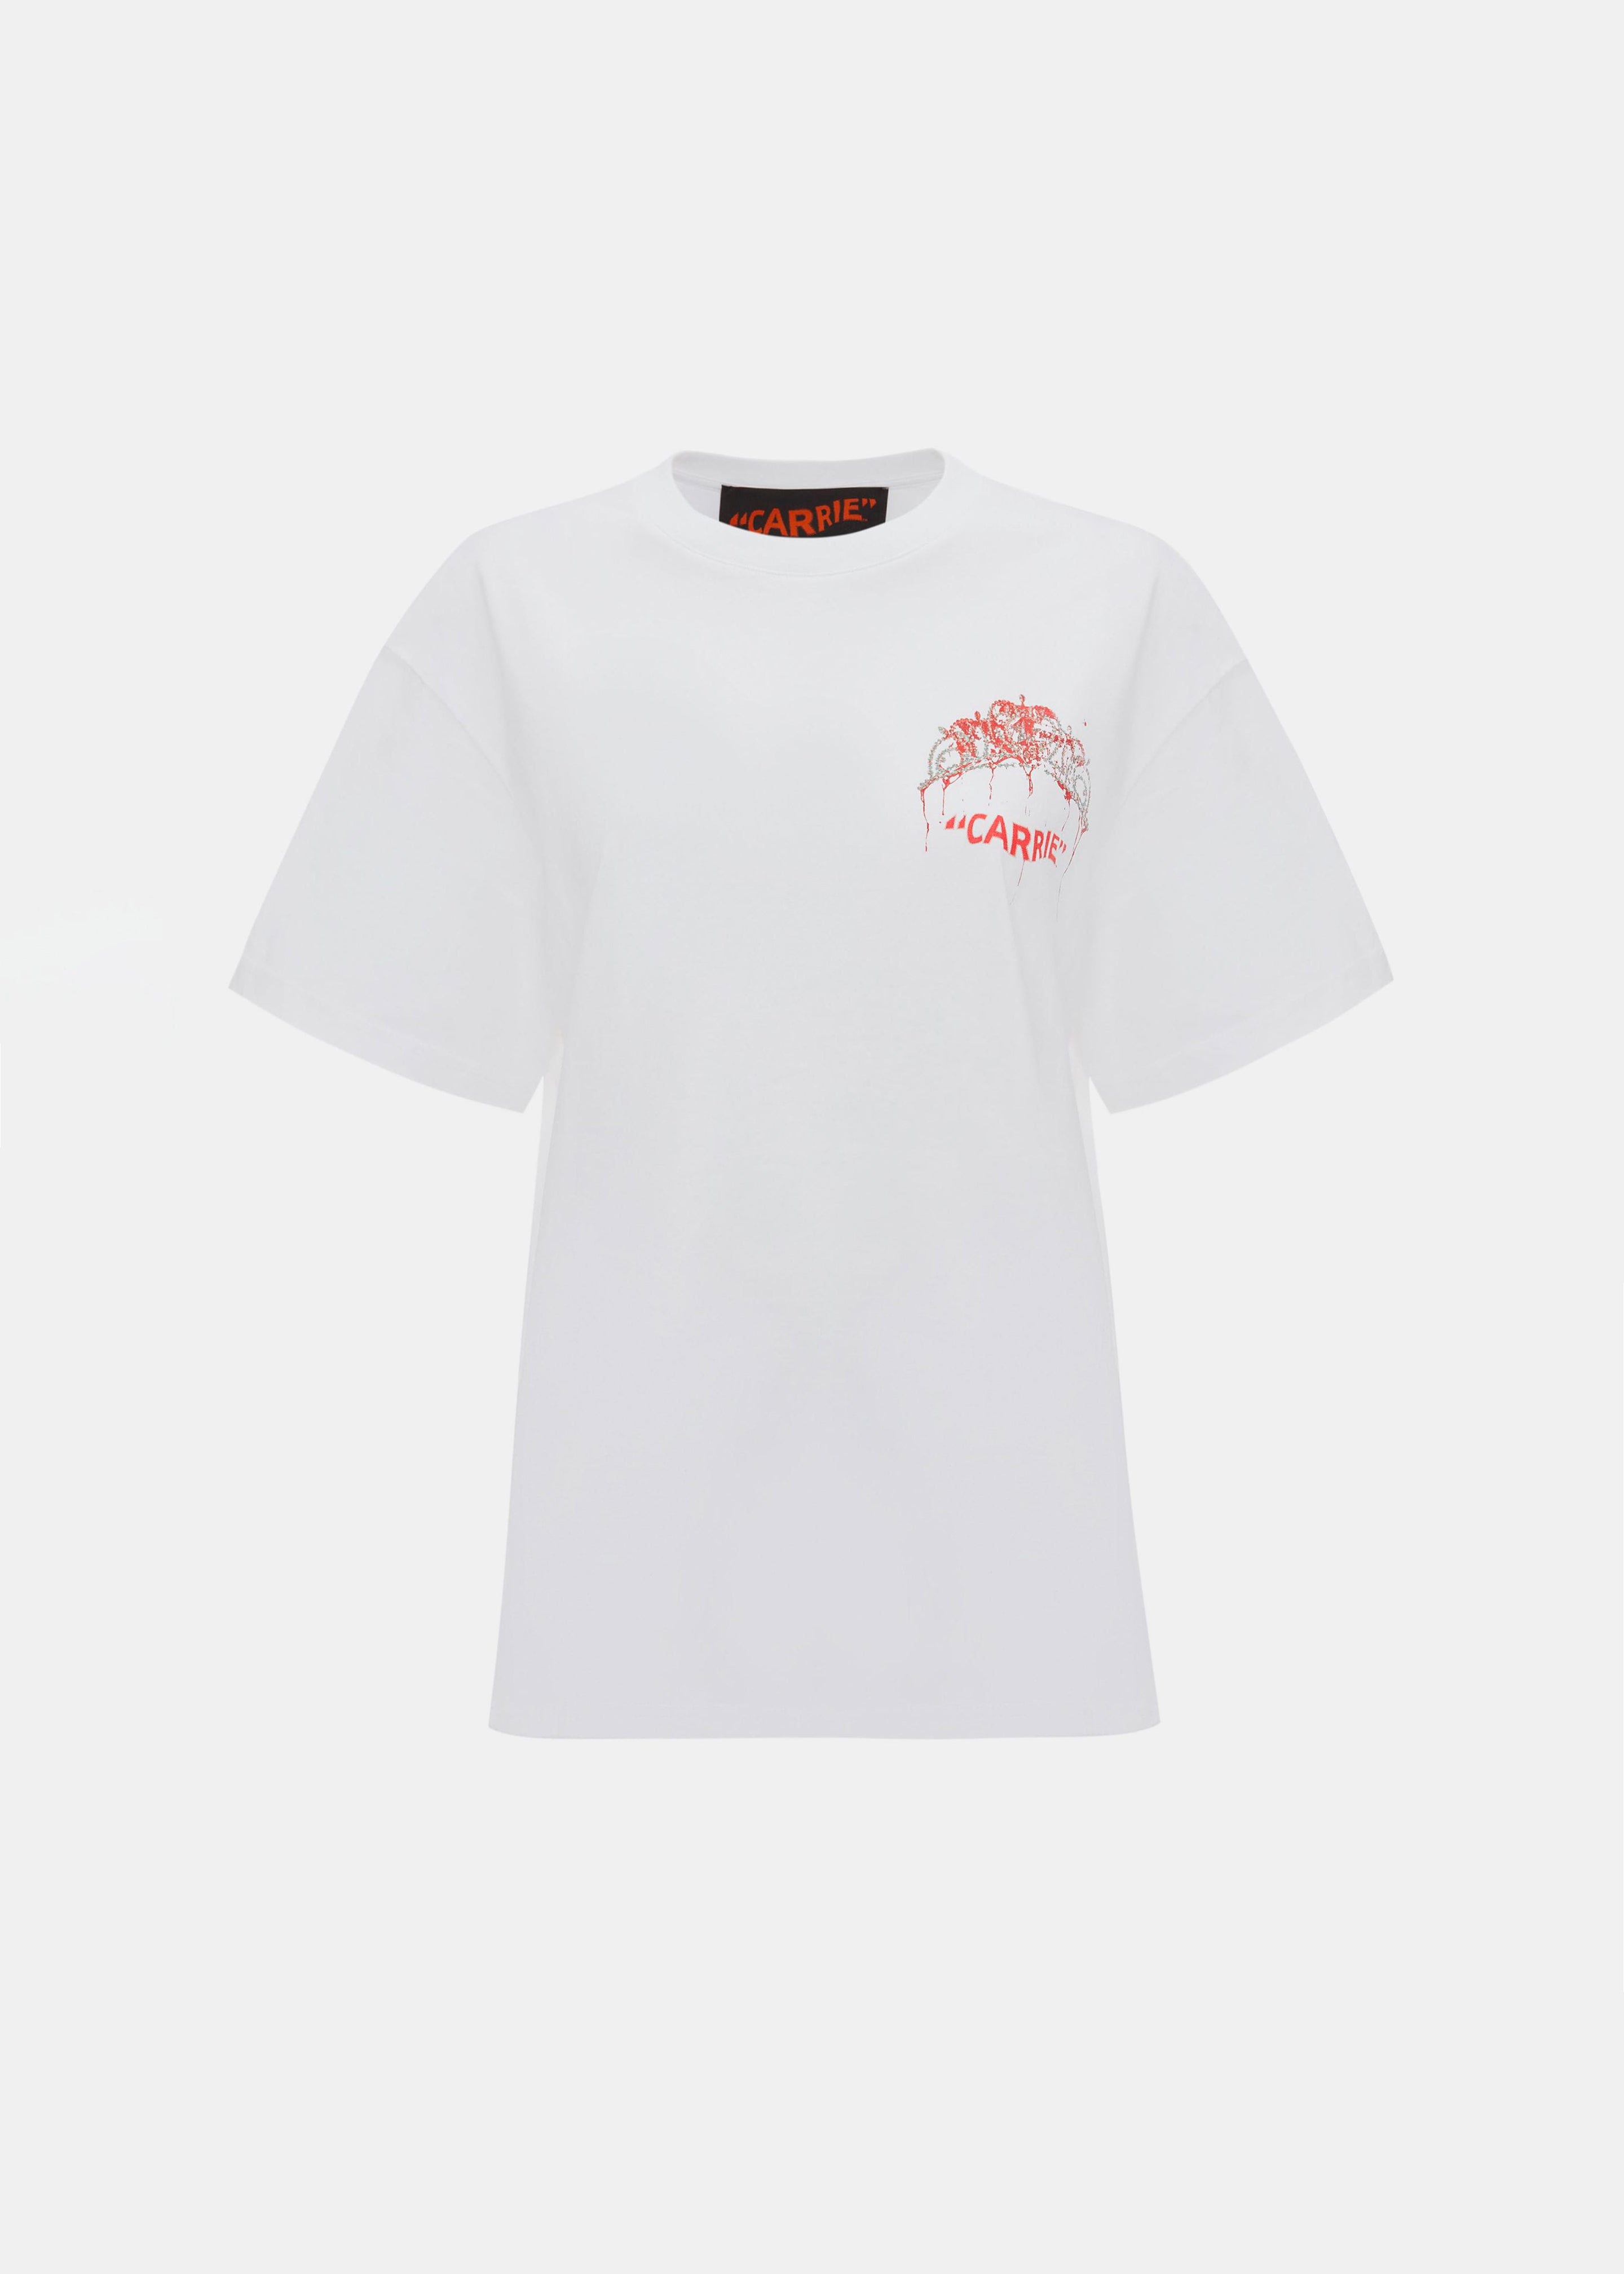 JW Anderson Carrie Tiara Chest Embroidery T-Shirt - White - 5